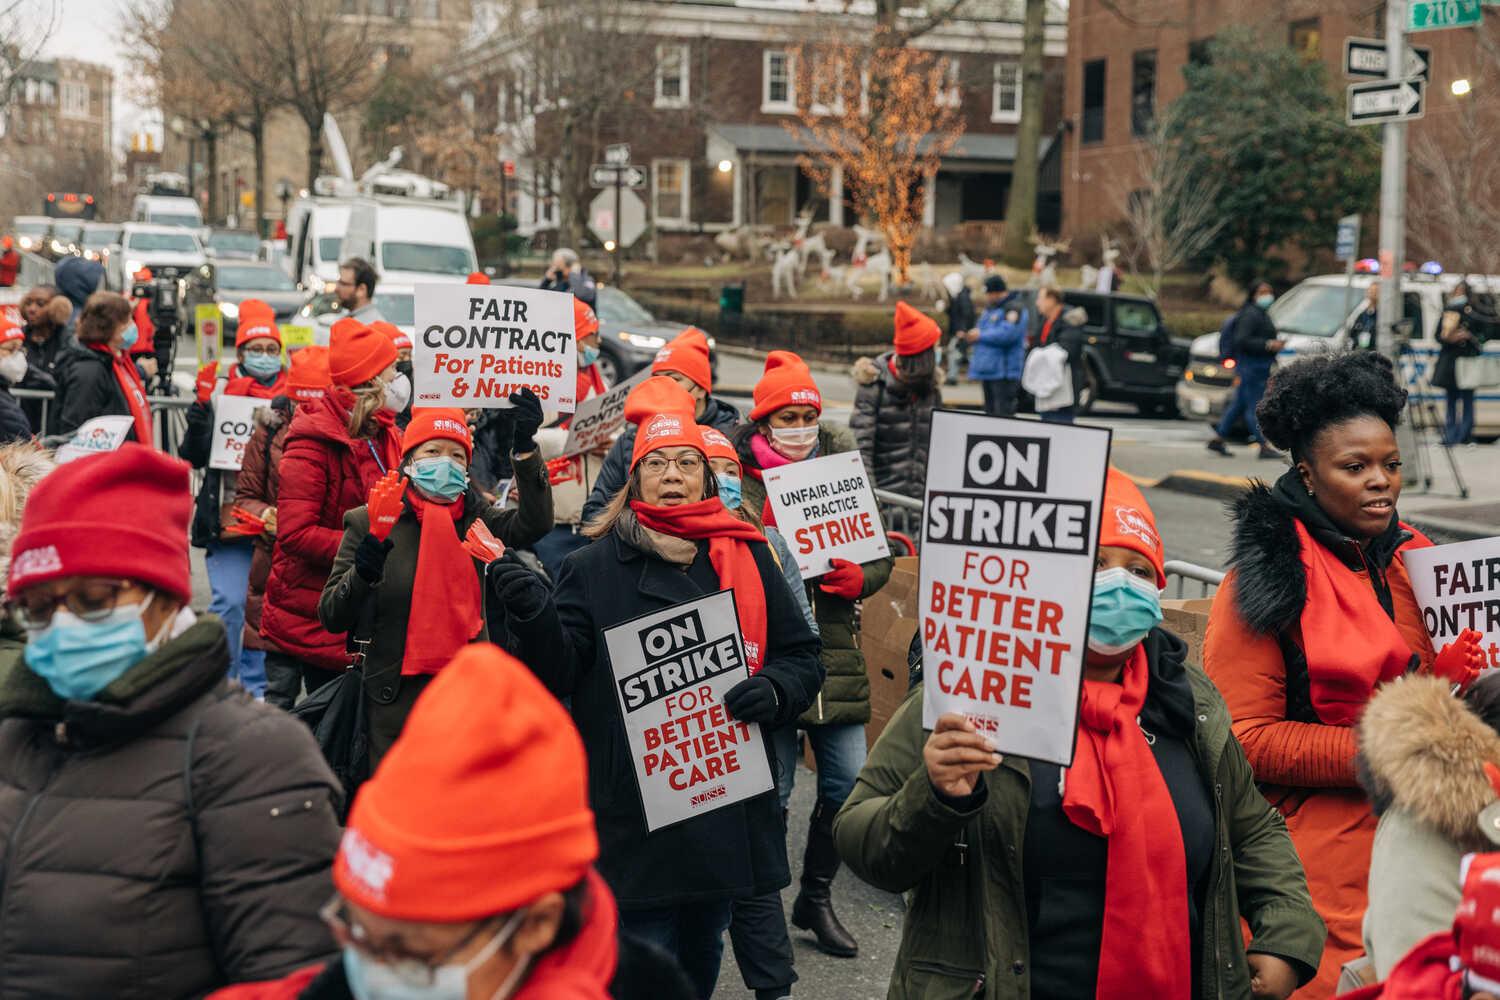 Women wearing red hats, scarves and gloves march down a sidewalk holding signs that say, “On strike for better patient care.”